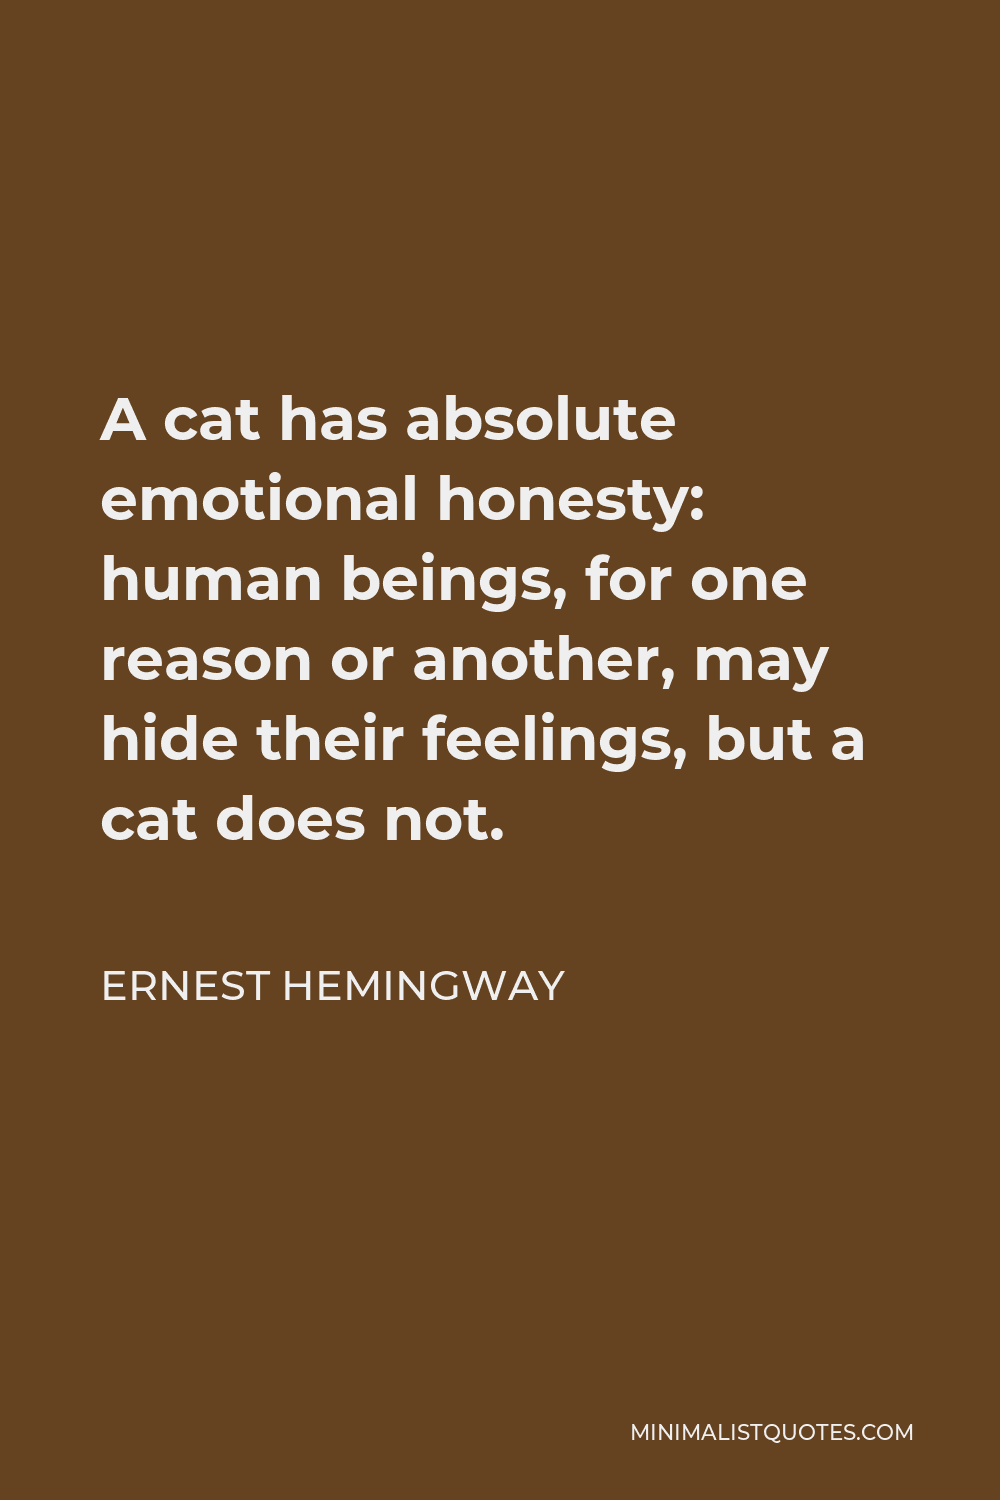 Ernest Hemingway Quote - A cat has absolute emotional honesty: human beings, for one reason or another, may hide their feelings, but a cat does not.